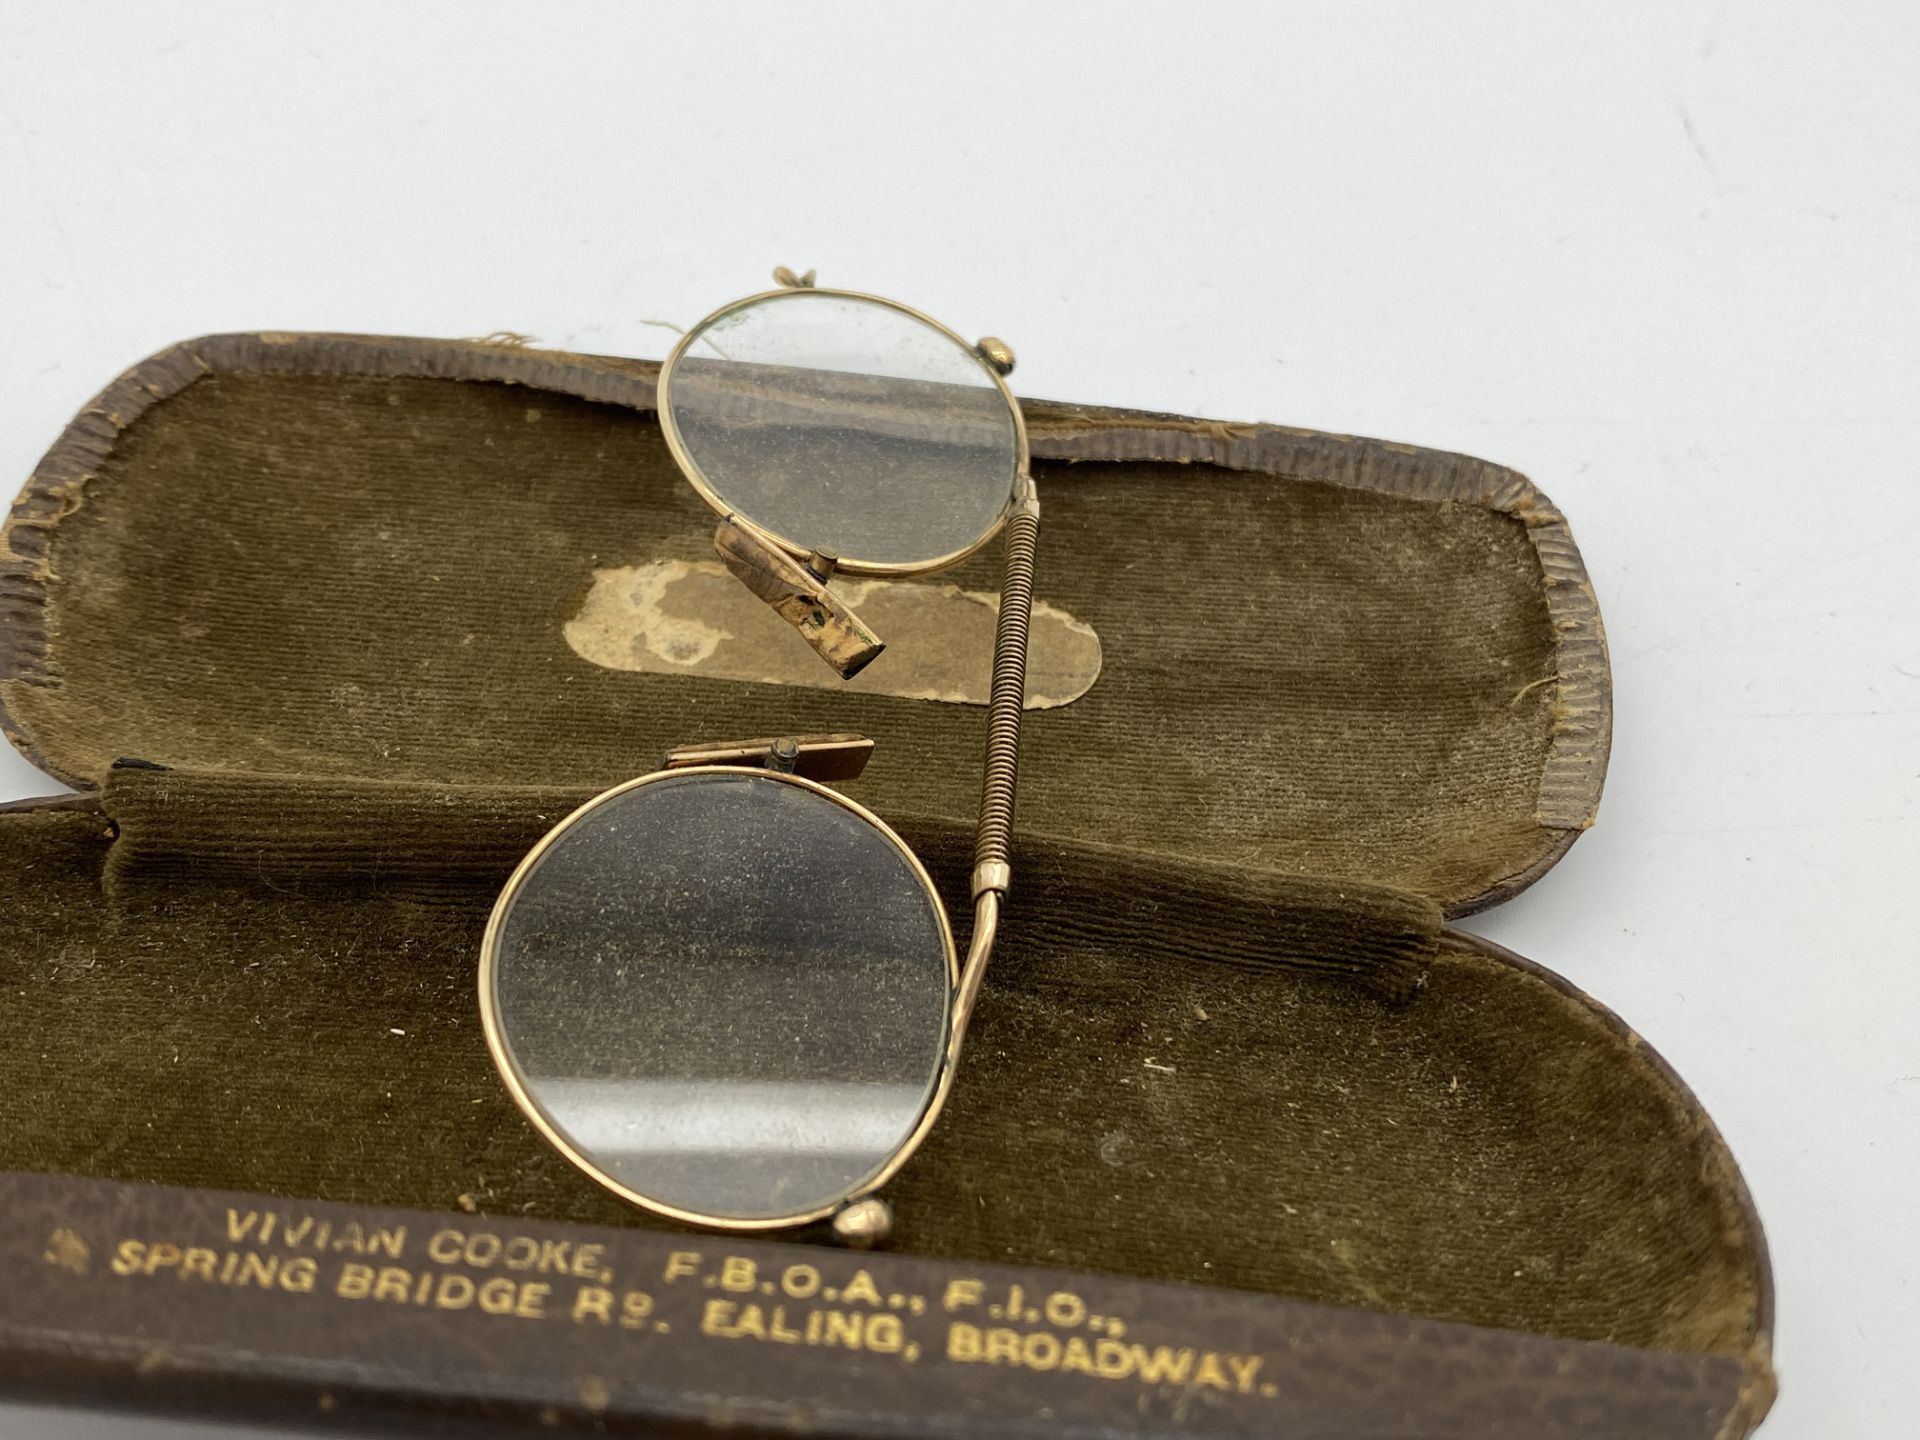 ANTIQUE 10CT GOLD SPECTACLES (GLASSES) WITH METAL CASE - Image 3 of 7